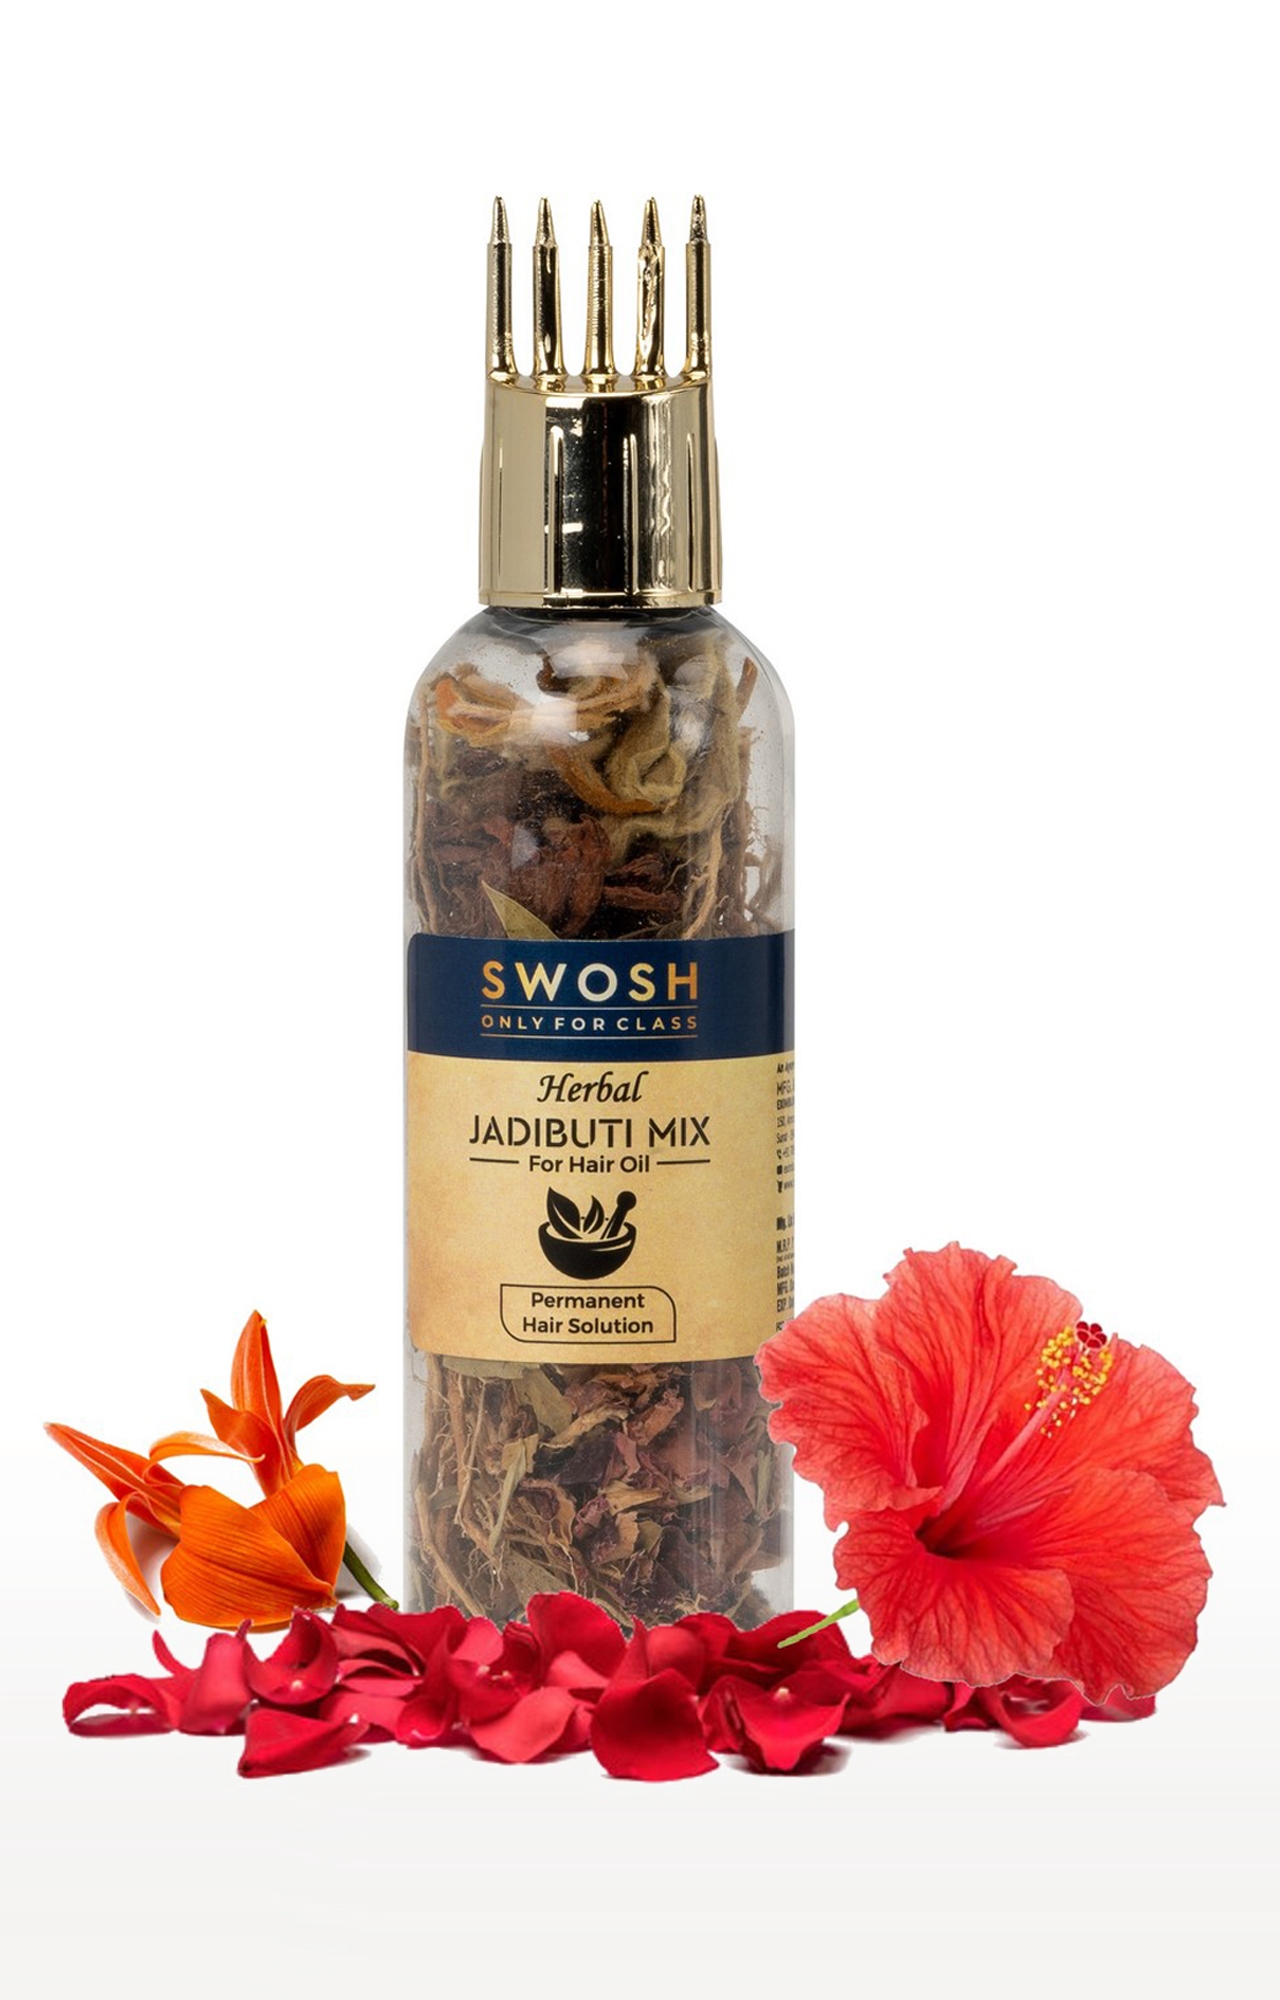 Swosh Ayurvedic Herbal Hair Oil Mix Bottle For Healthy Hair Growth Packed With Goodness Of Ayurvedic Natural Dried Herbs For Oil Infusion 10G